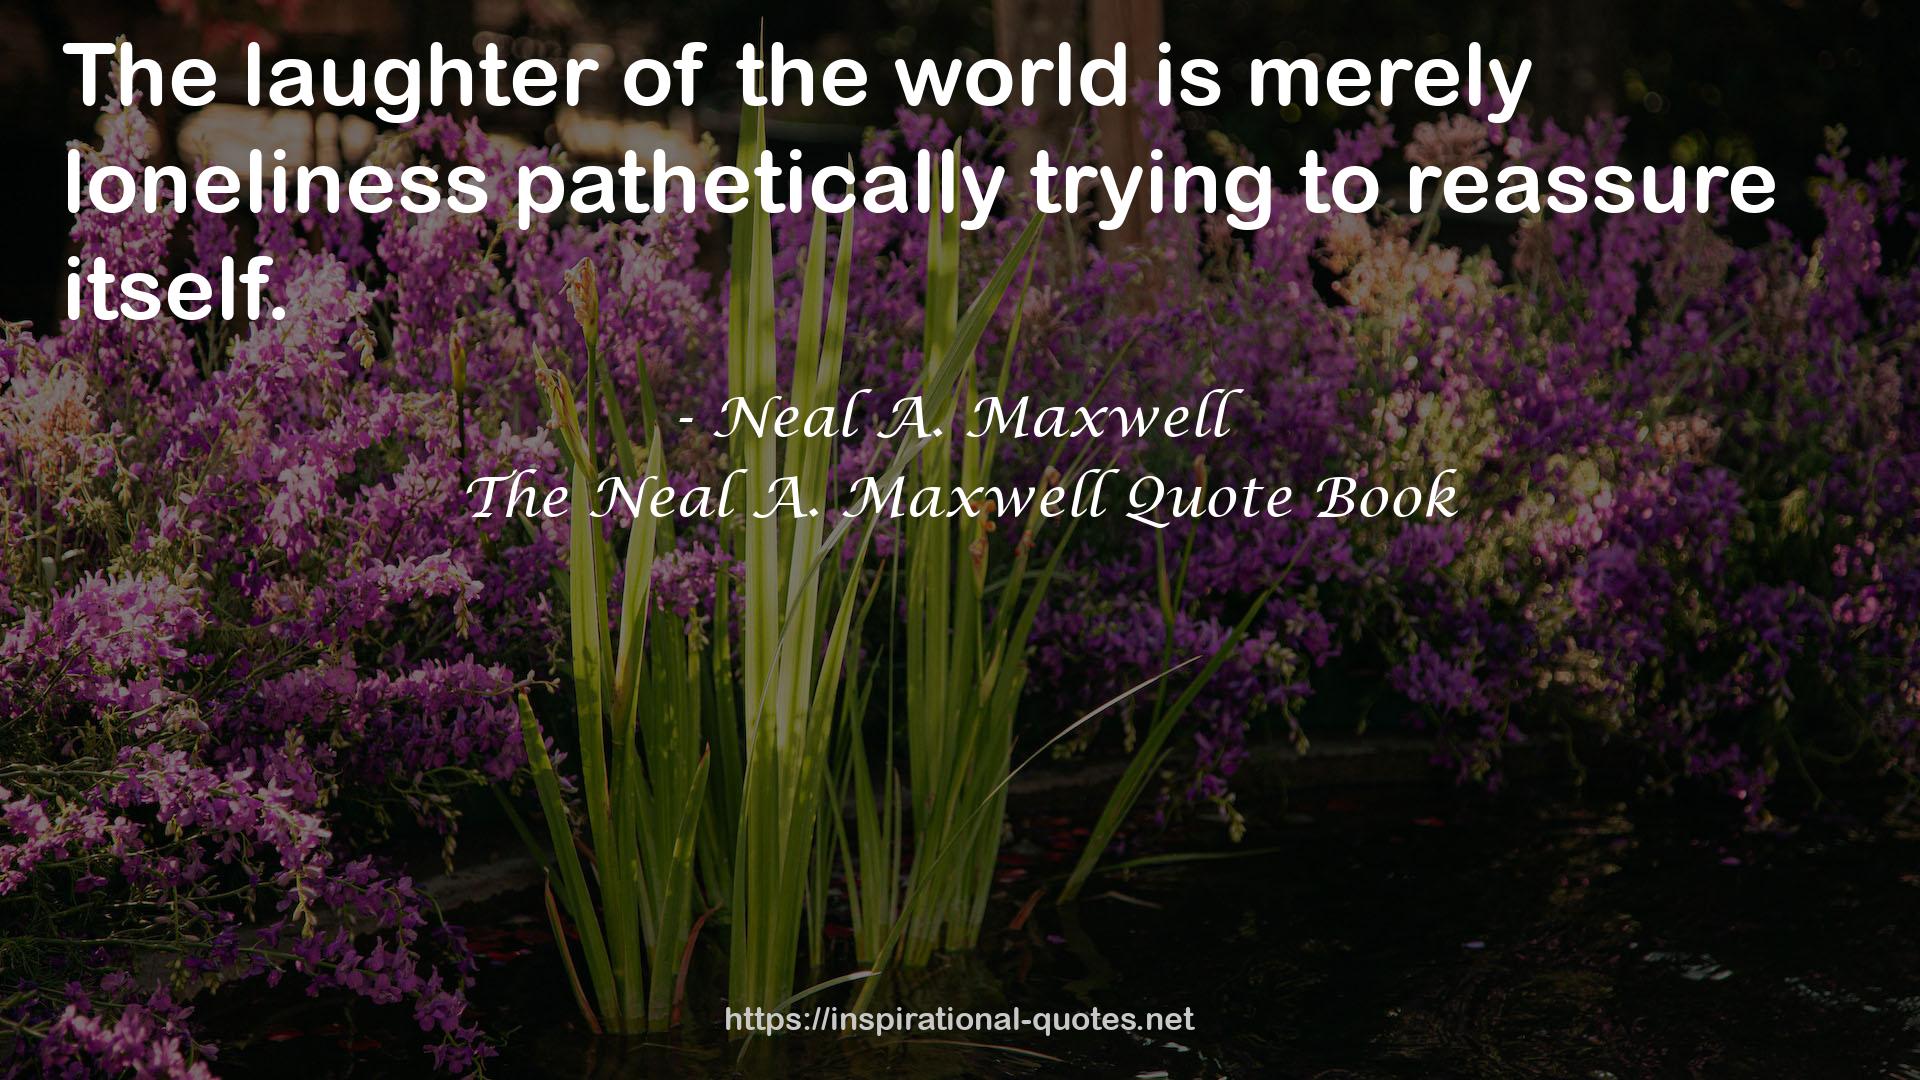 The Neal A. Maxwell Quote Book QUOTES